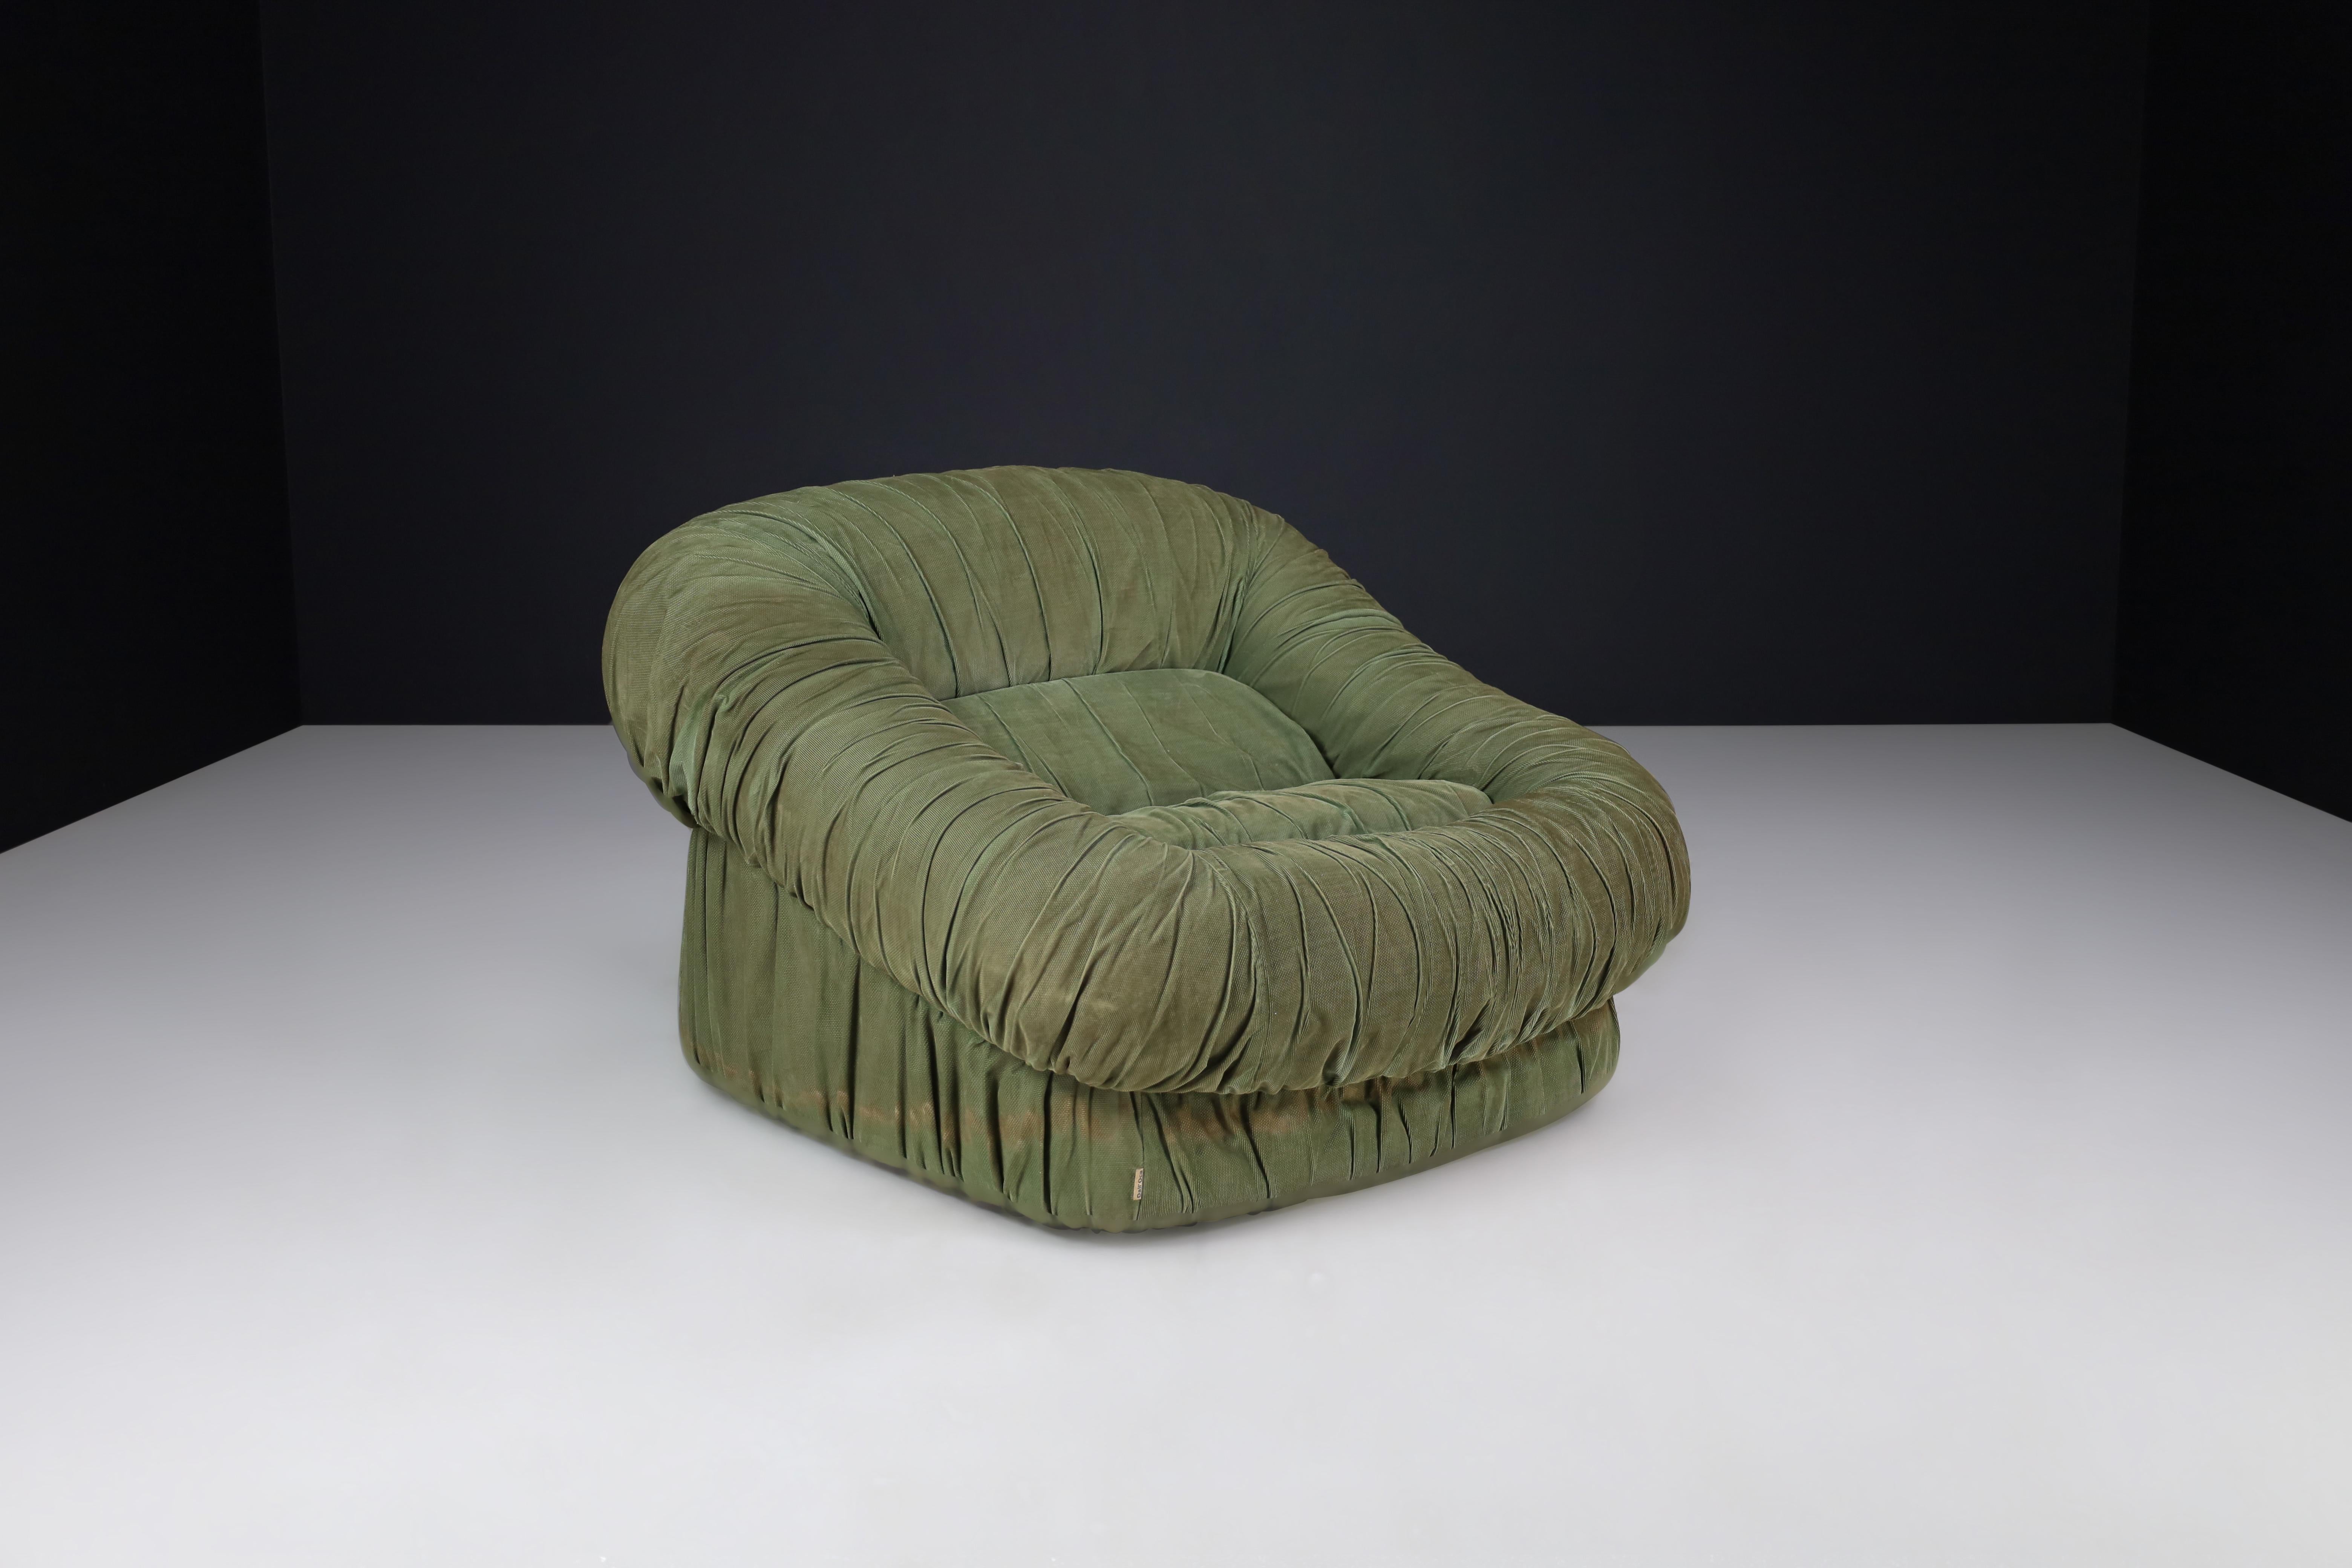 De Pas, D’Urbino, and Lomazzi for Dall’Oca Lounge Chair, Italy 1970s

This is a Mid-Century Modern lounge chair made in Italy in 1970 by De Pas, D'Urbino, and Lomazzi for Dall'Oca. The chair is covered in original green fabric upholstery and is